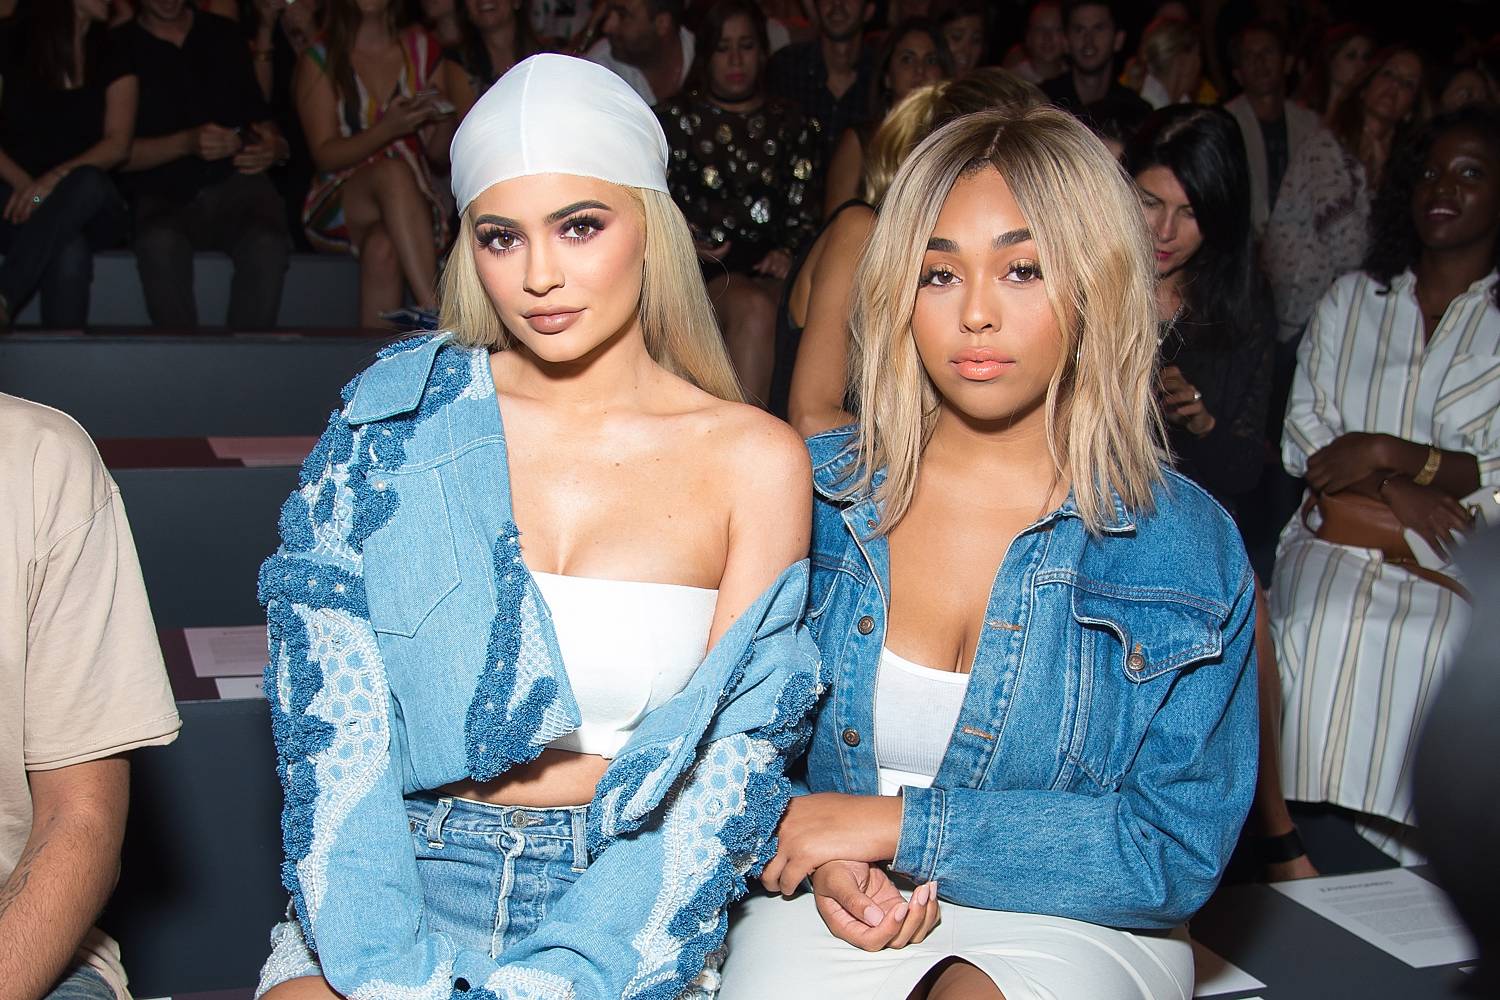 TV personality Kylie Jenner (L) and Jordyn Woods attend the Jonathan Simkhai fashion show during September 2016 MADE Fashion Week: The Shows at The Arc, Skylight at Moynihan Station on September 10, 2016 in New York City.